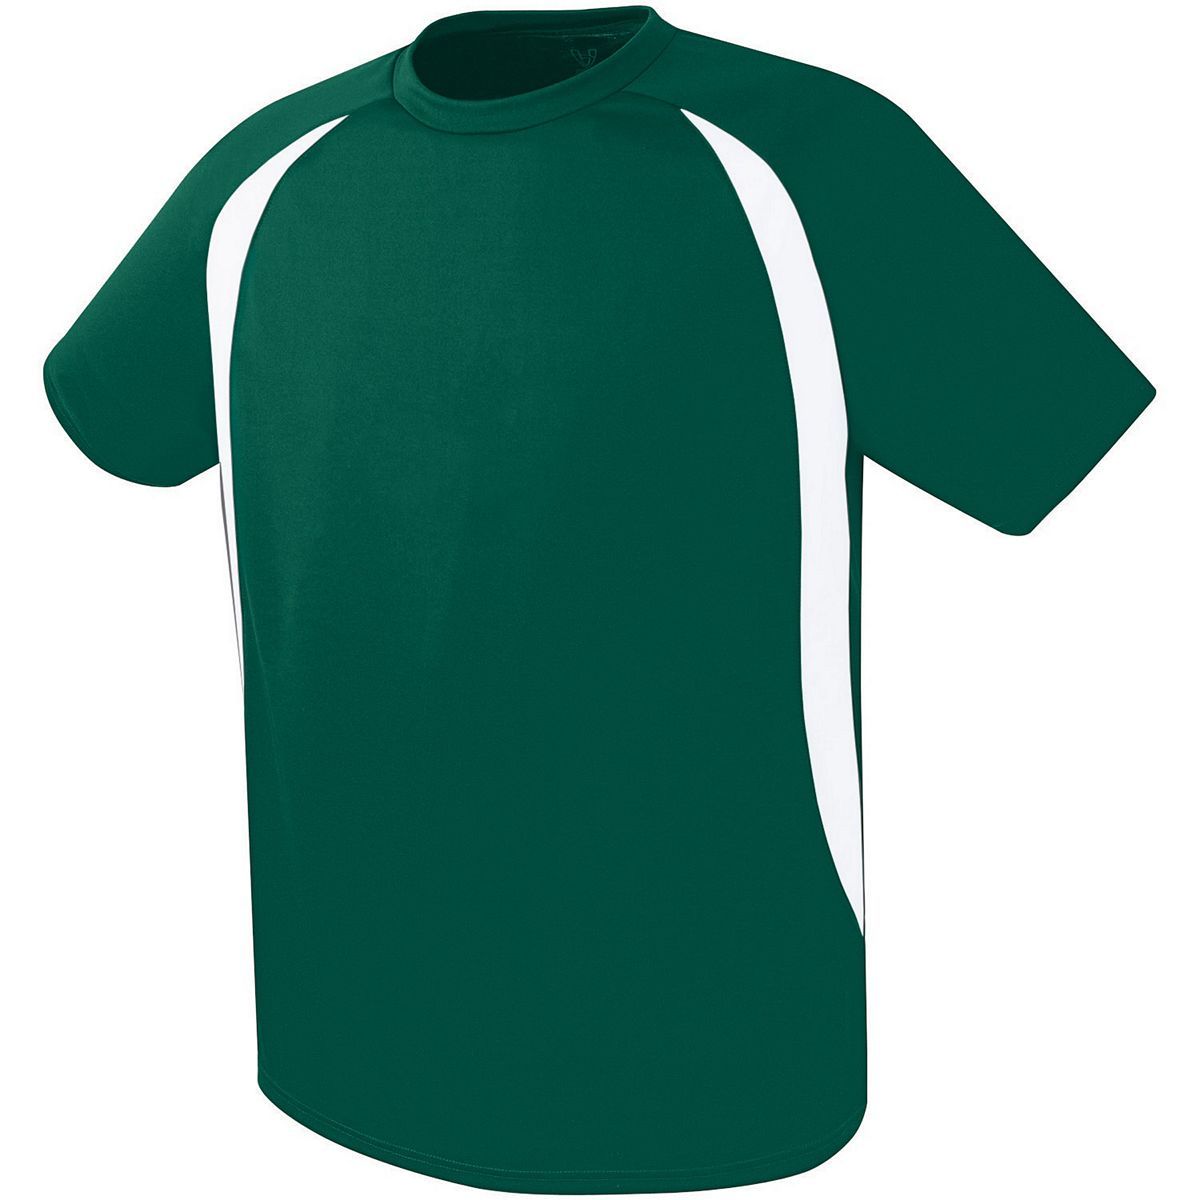 High 5 Liberty  Soccer Jersey in Forest/White  -Part of the Adult, Adult-Jersey, High5-Products, Soccer, Shirts, All-Sports-1 product lines at KanaleyCreations.com